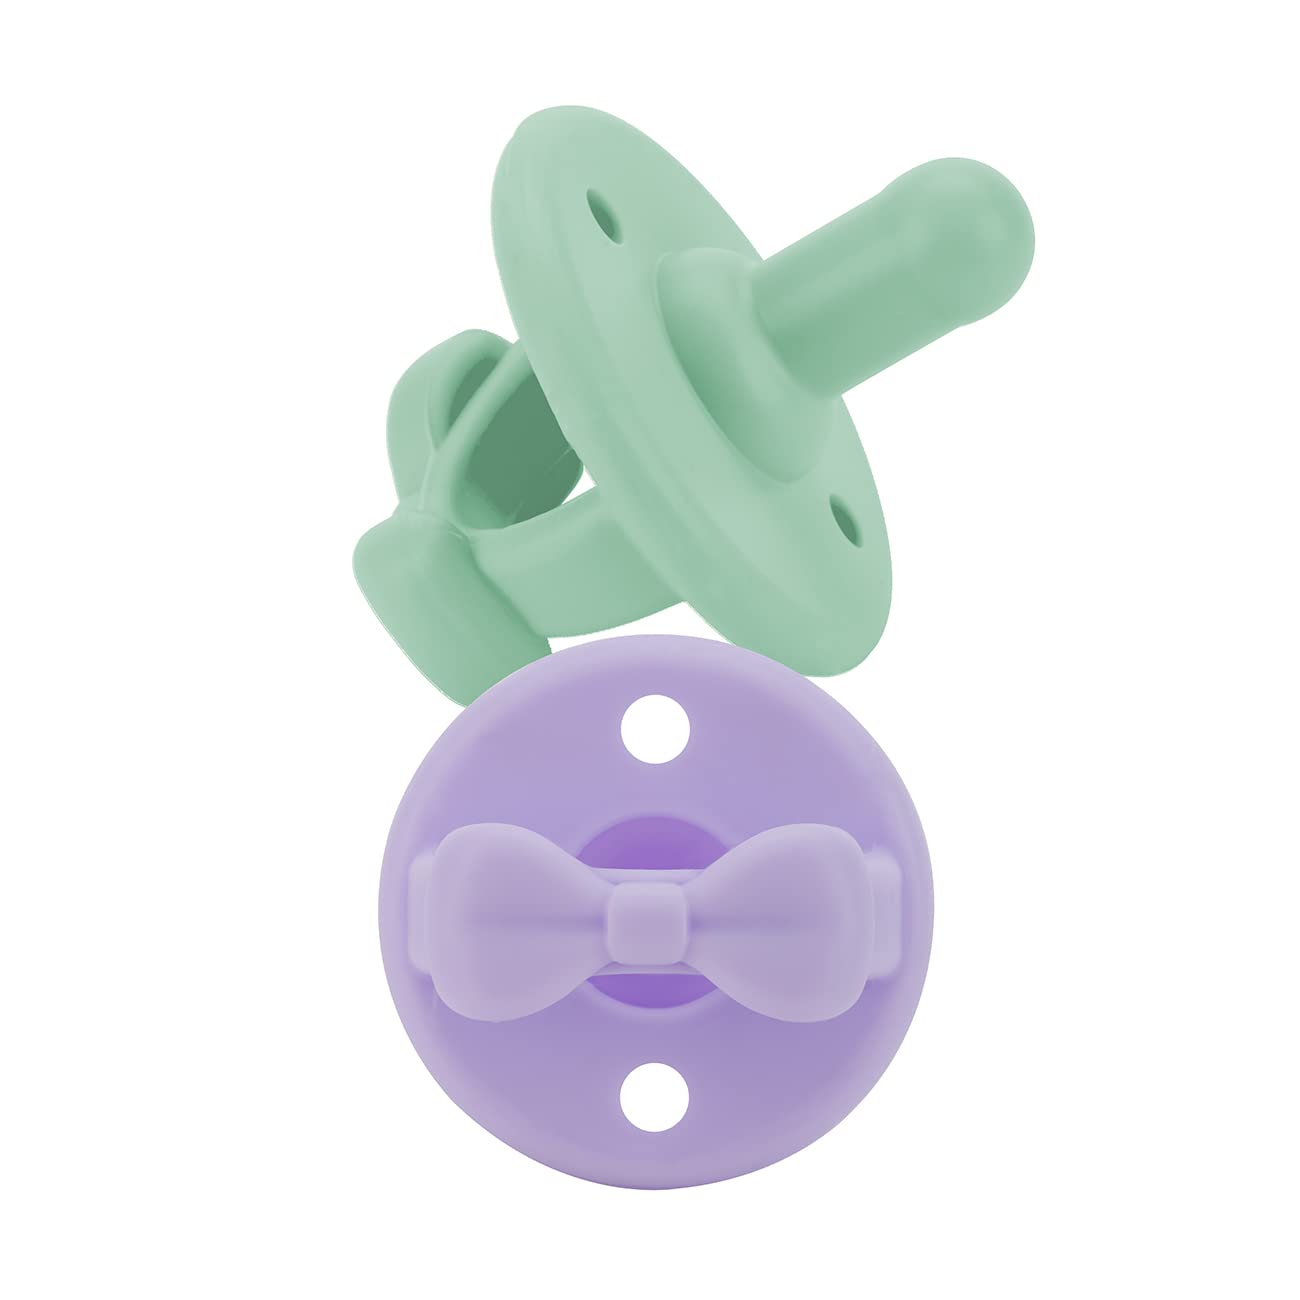 Itzy Ritzy Silicone Pacifiers for Newborn - Sweetie Soother Pacifiers Feature Collapsible Handle & Two Air Holes for Added Safety; for Ages Newborn and Up, Set of 2 in Agave & Succulent